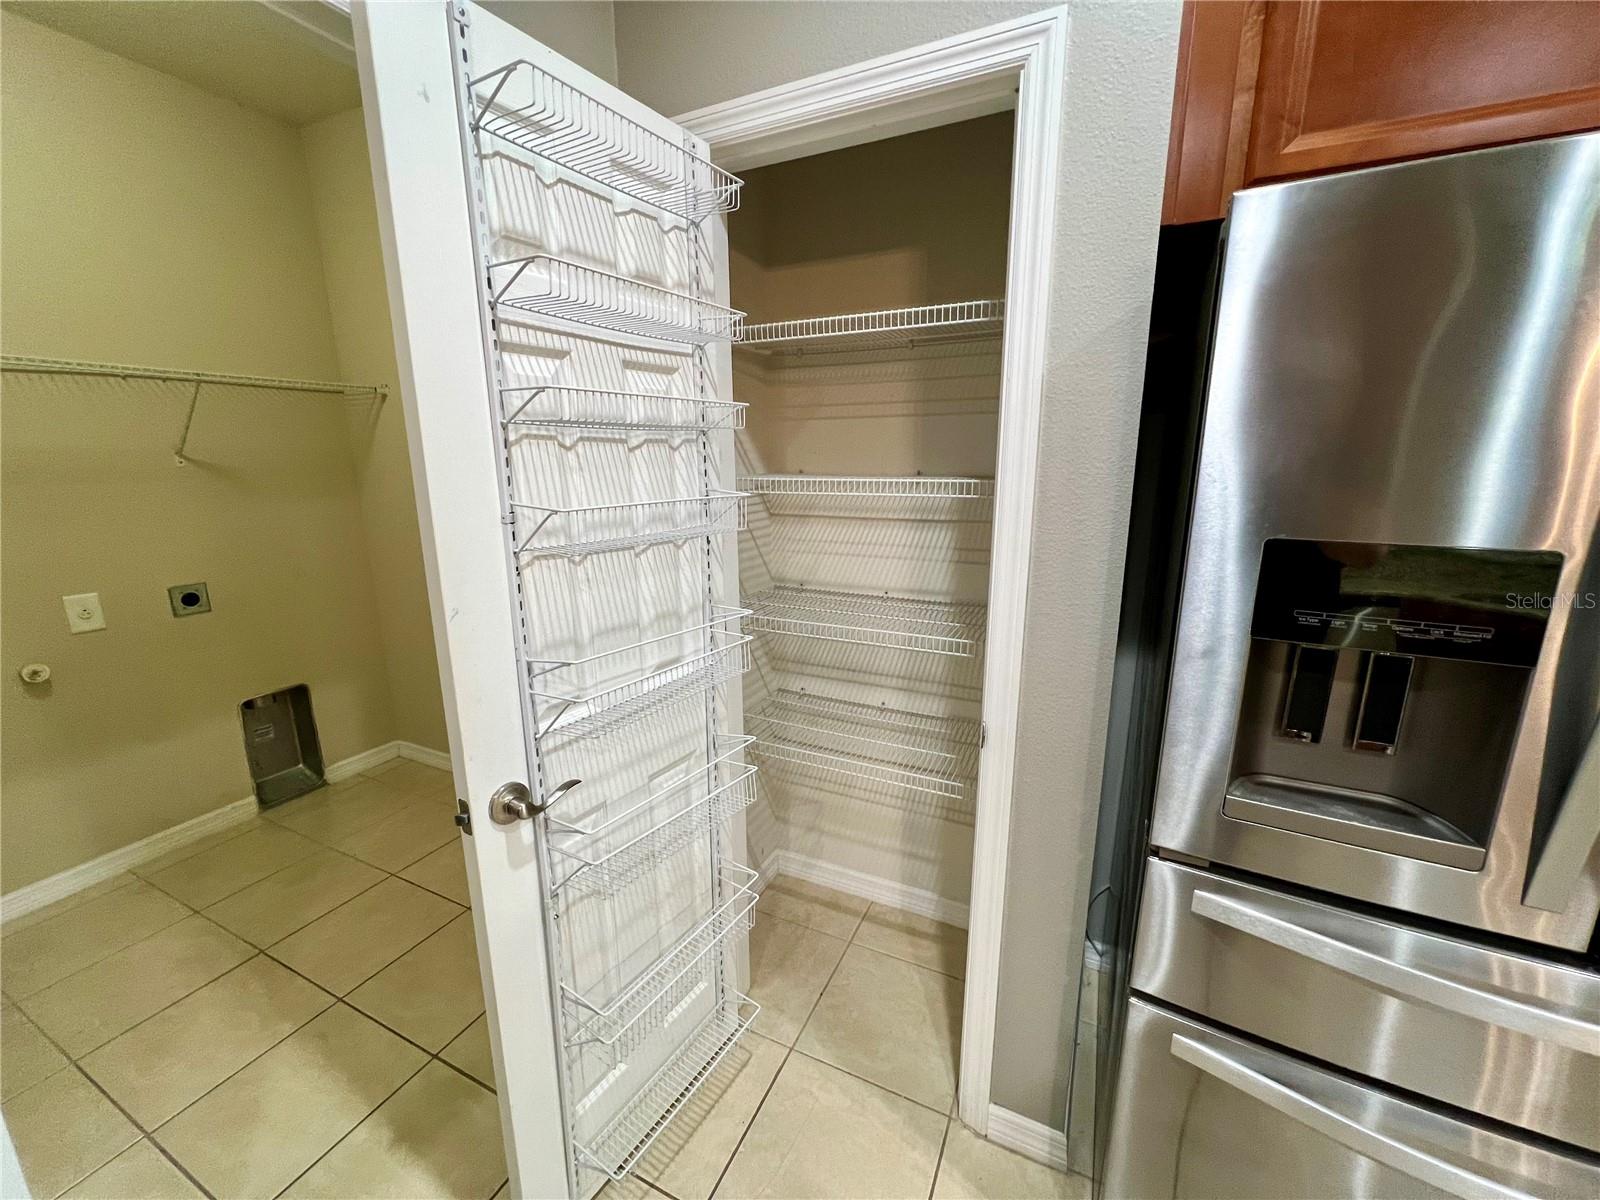 Pantry with easy access